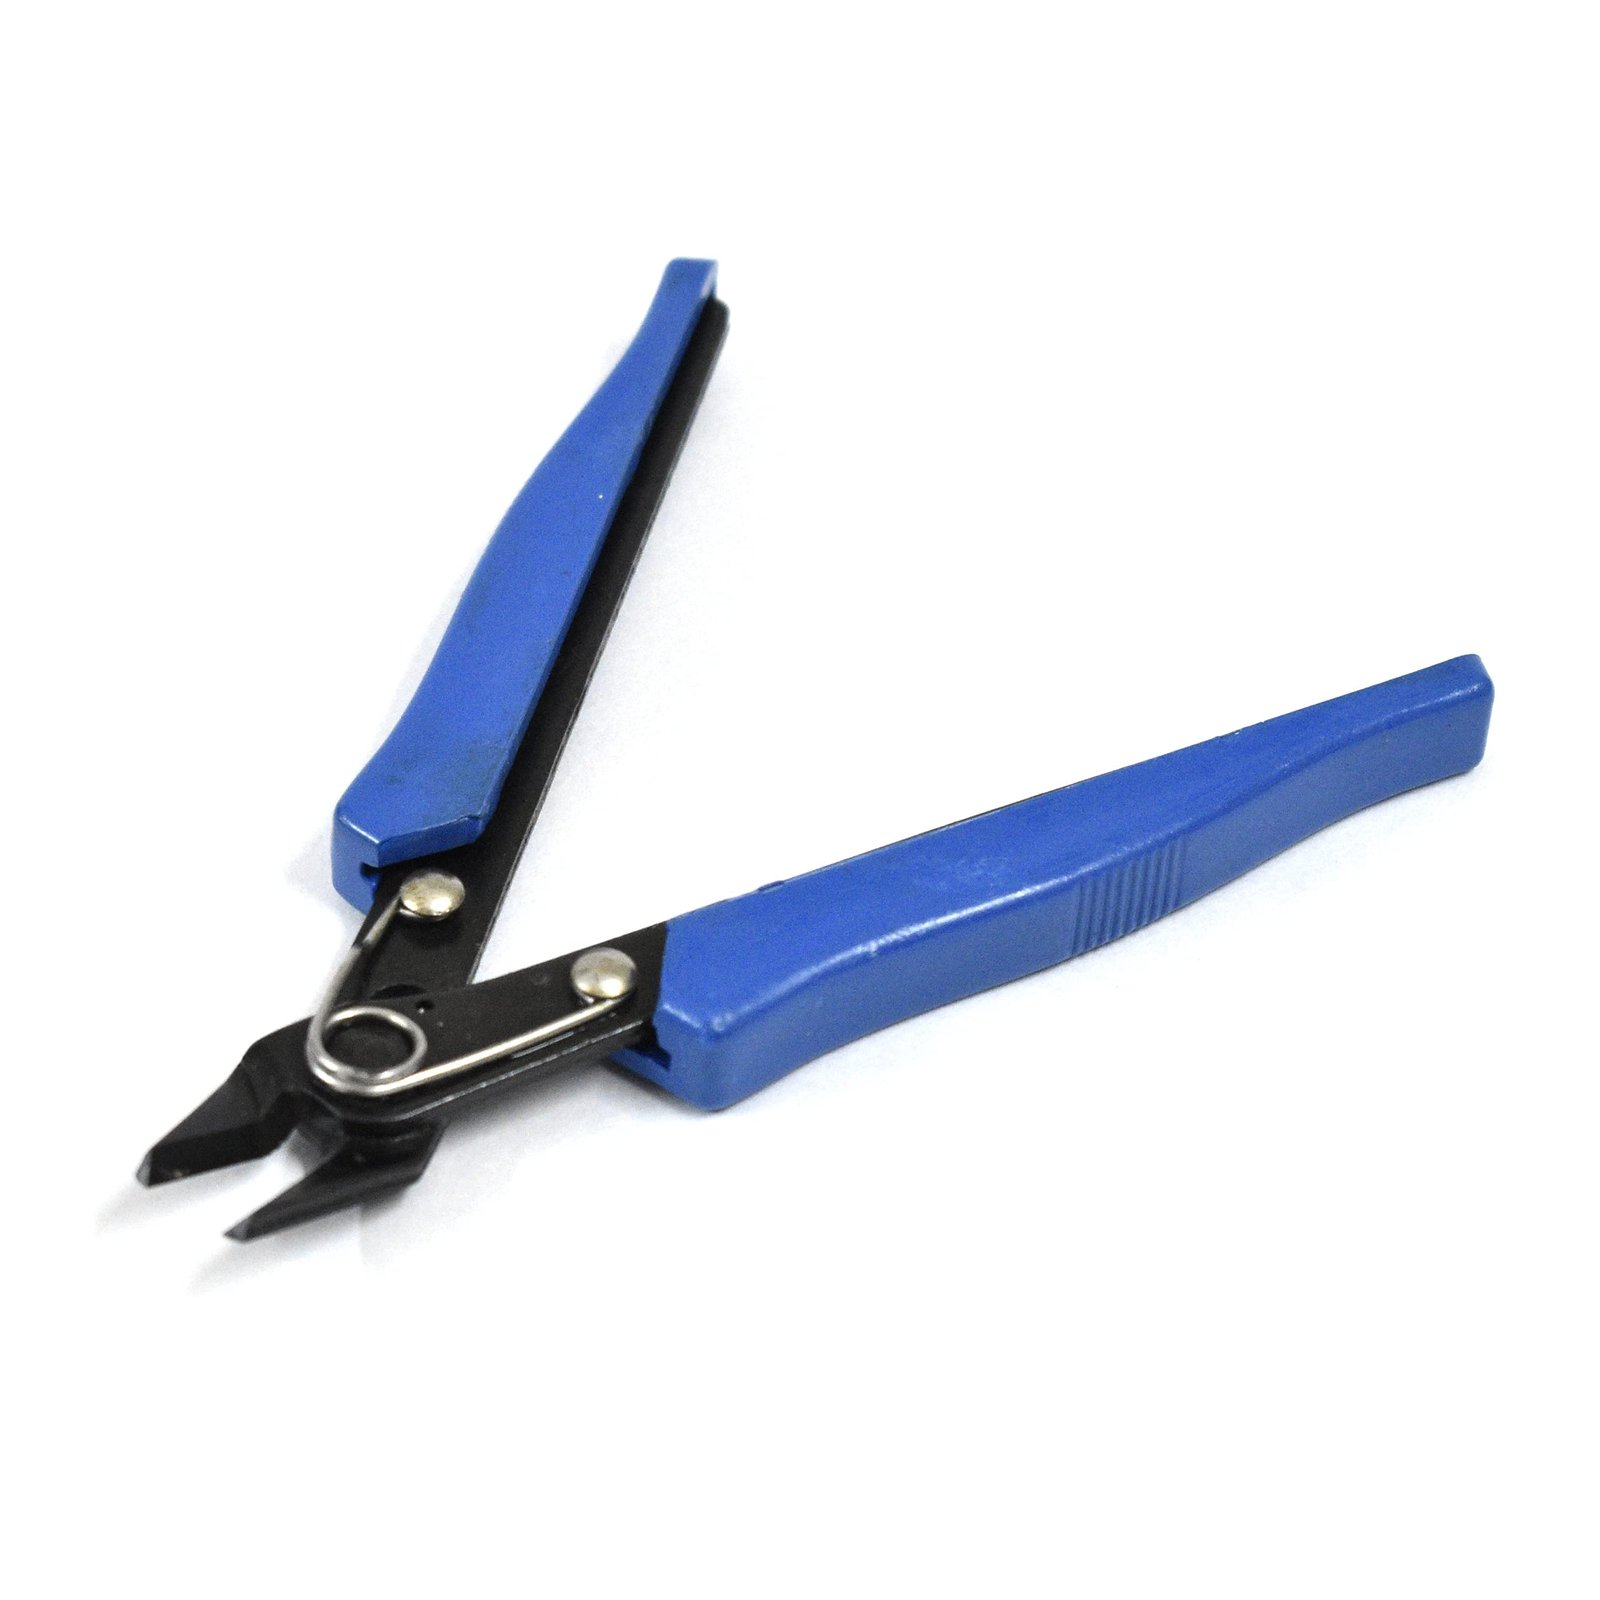 FPR Hand Nipper Cutter for Wire Cutting Sharp Cutter Tool for Multipurpose Use